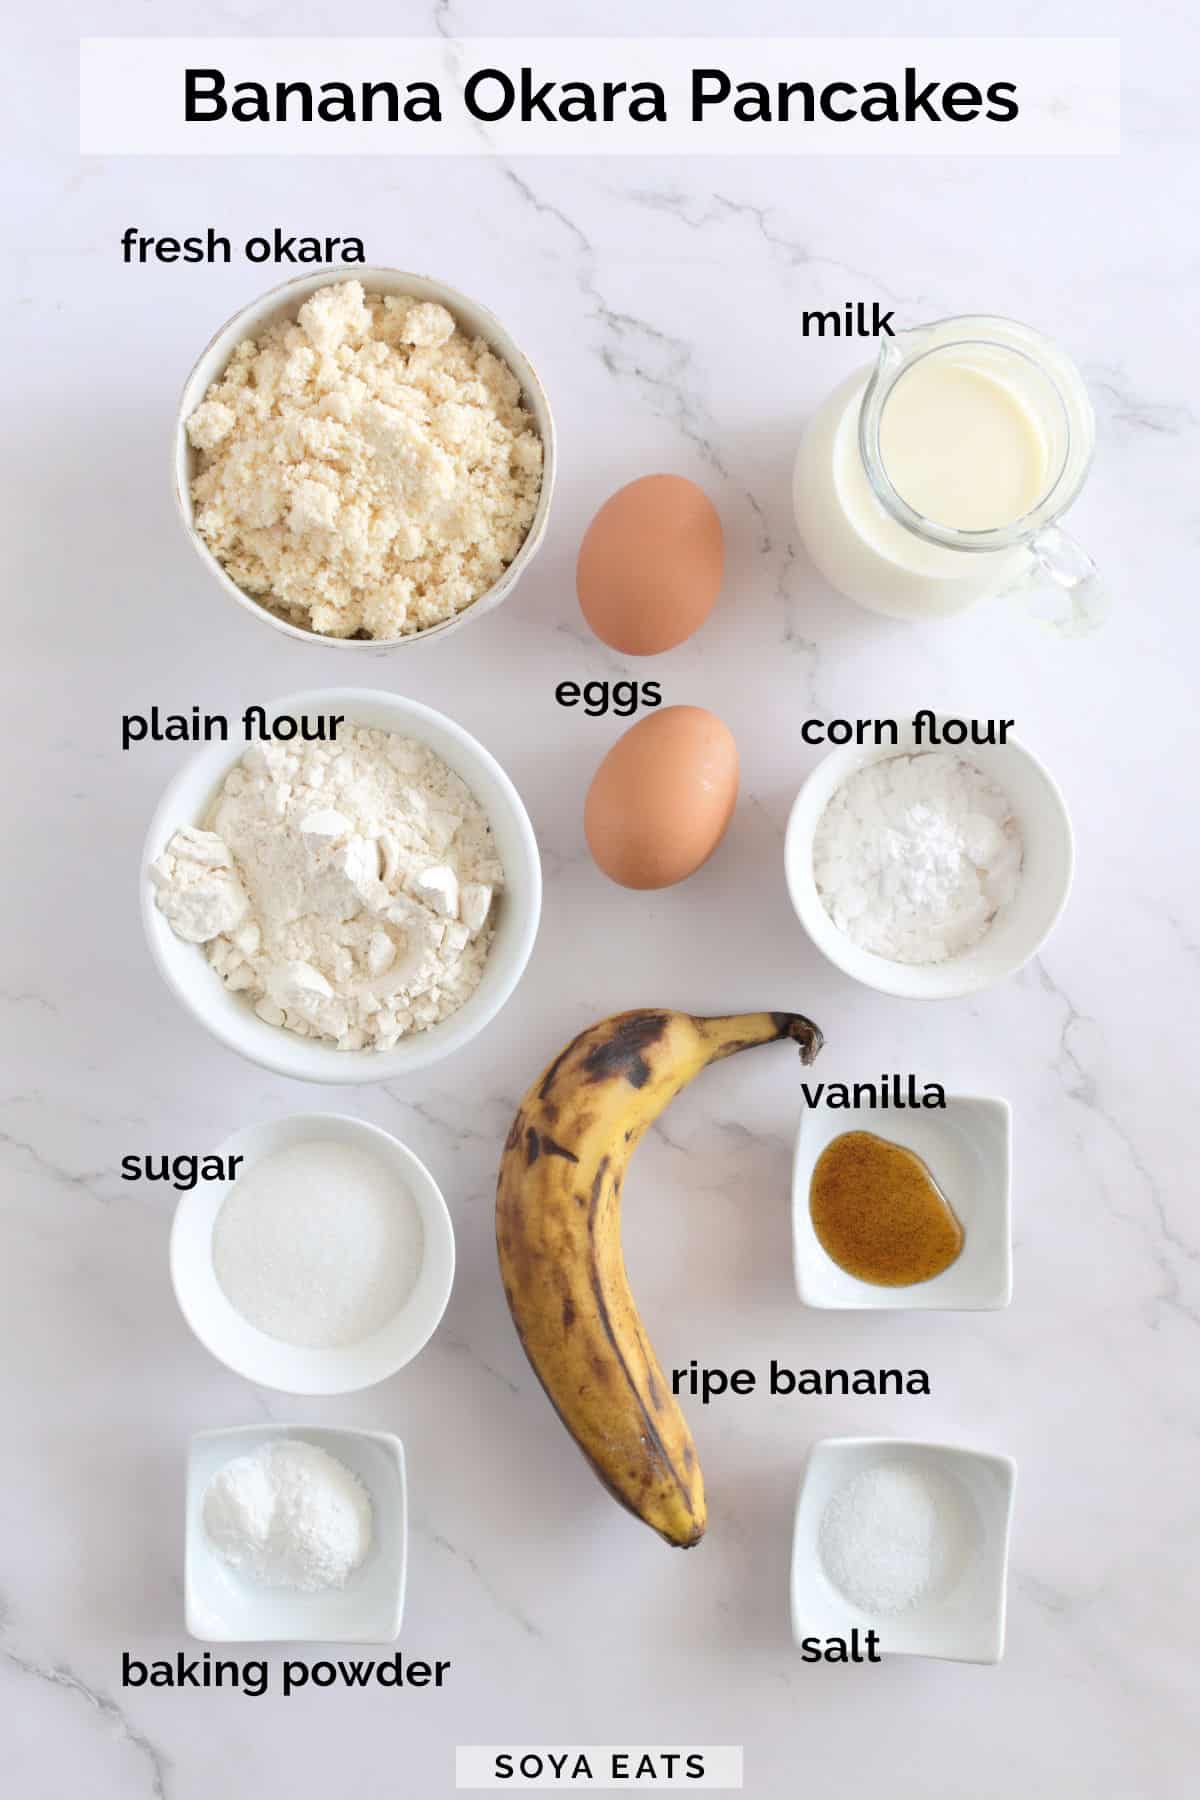 Images of ingredients needed to make banana pancakes.